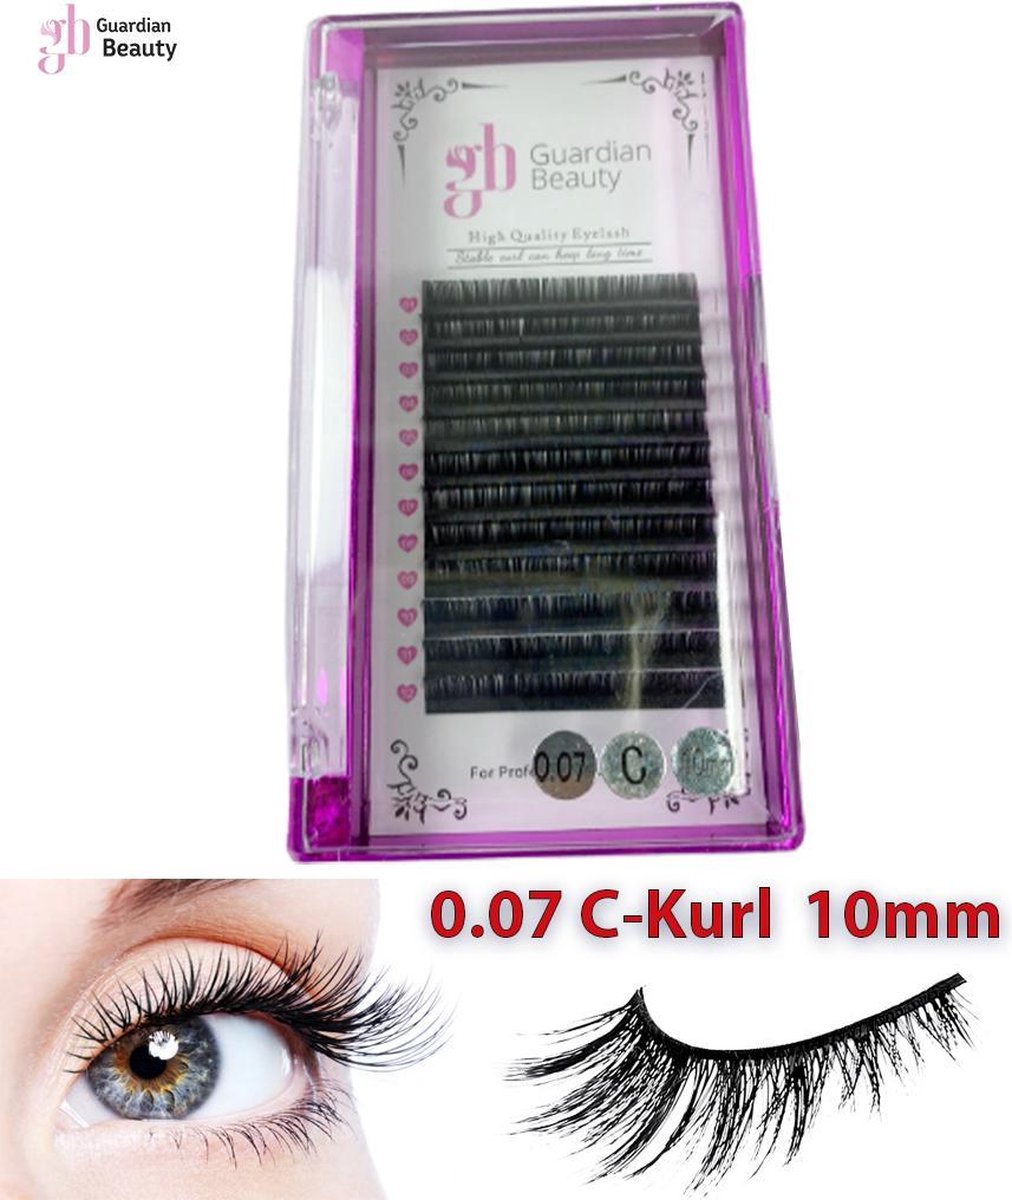 Wimpers Extension 10mm 0.07 C krul | Eyelashes | Wimpers | Wimperextensions